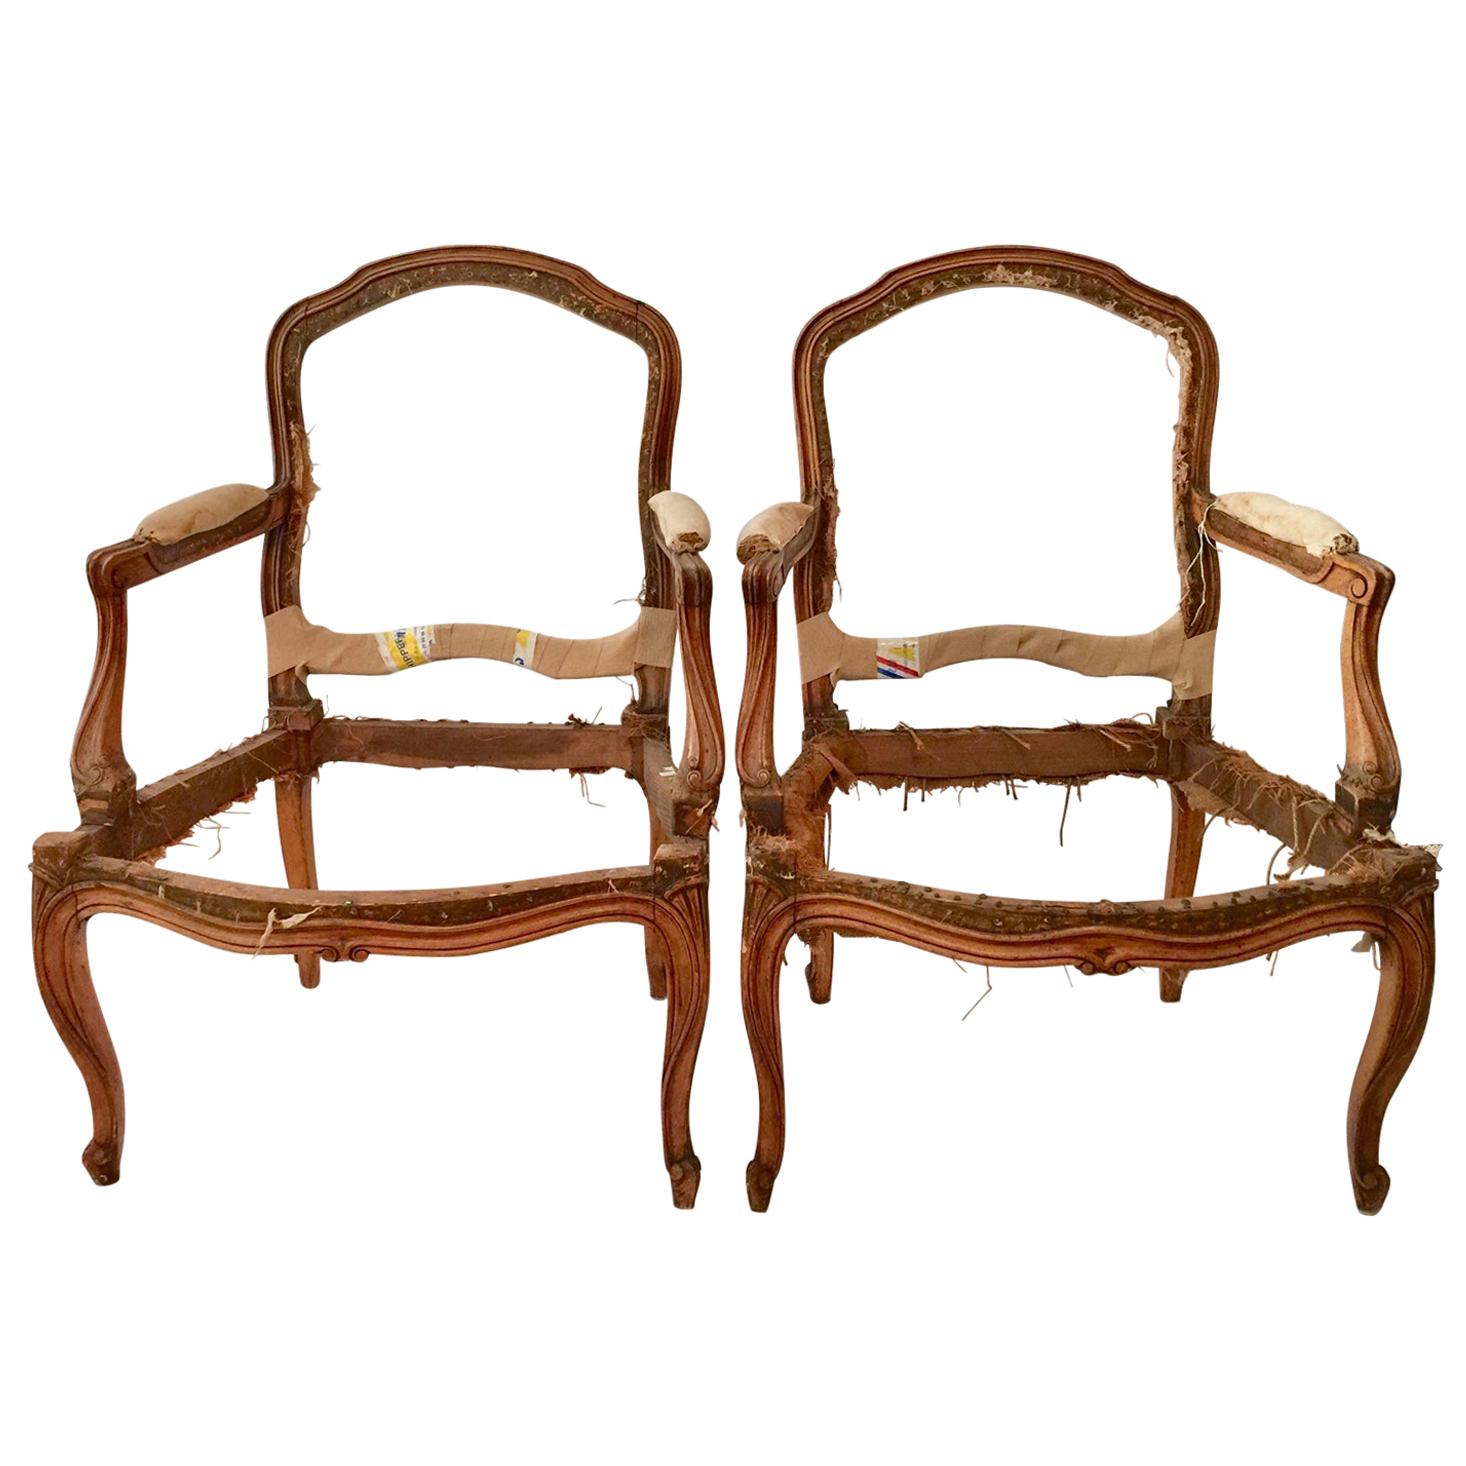 French Pair of Armchair Carcasses, Montespan Style, 19th Century For Sale